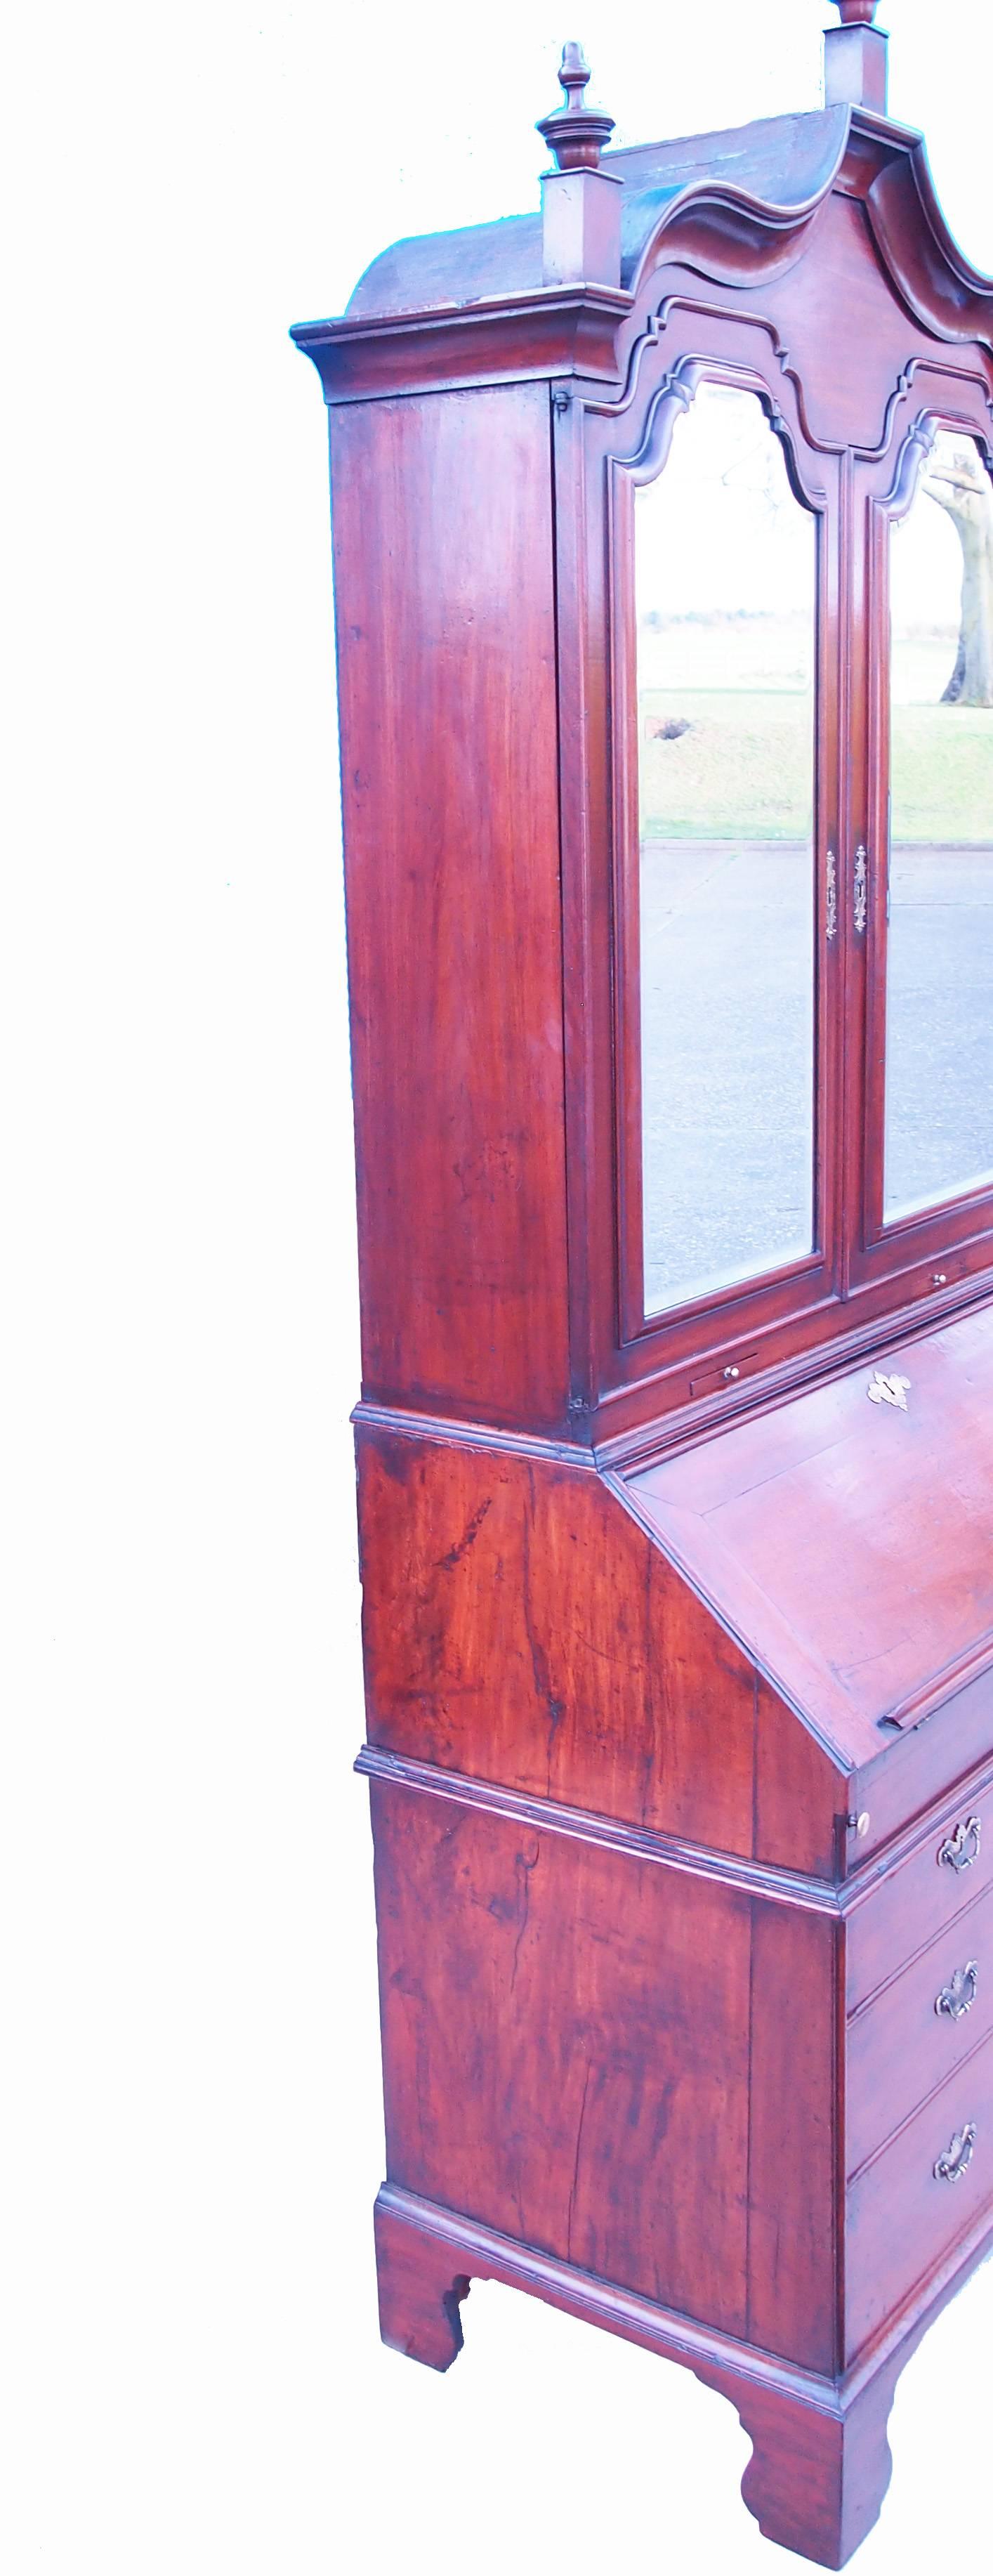 Early 18th Century Solid Walnut English Bureau Bookcase In Good Condition For Sale In Bedfordshire, GB